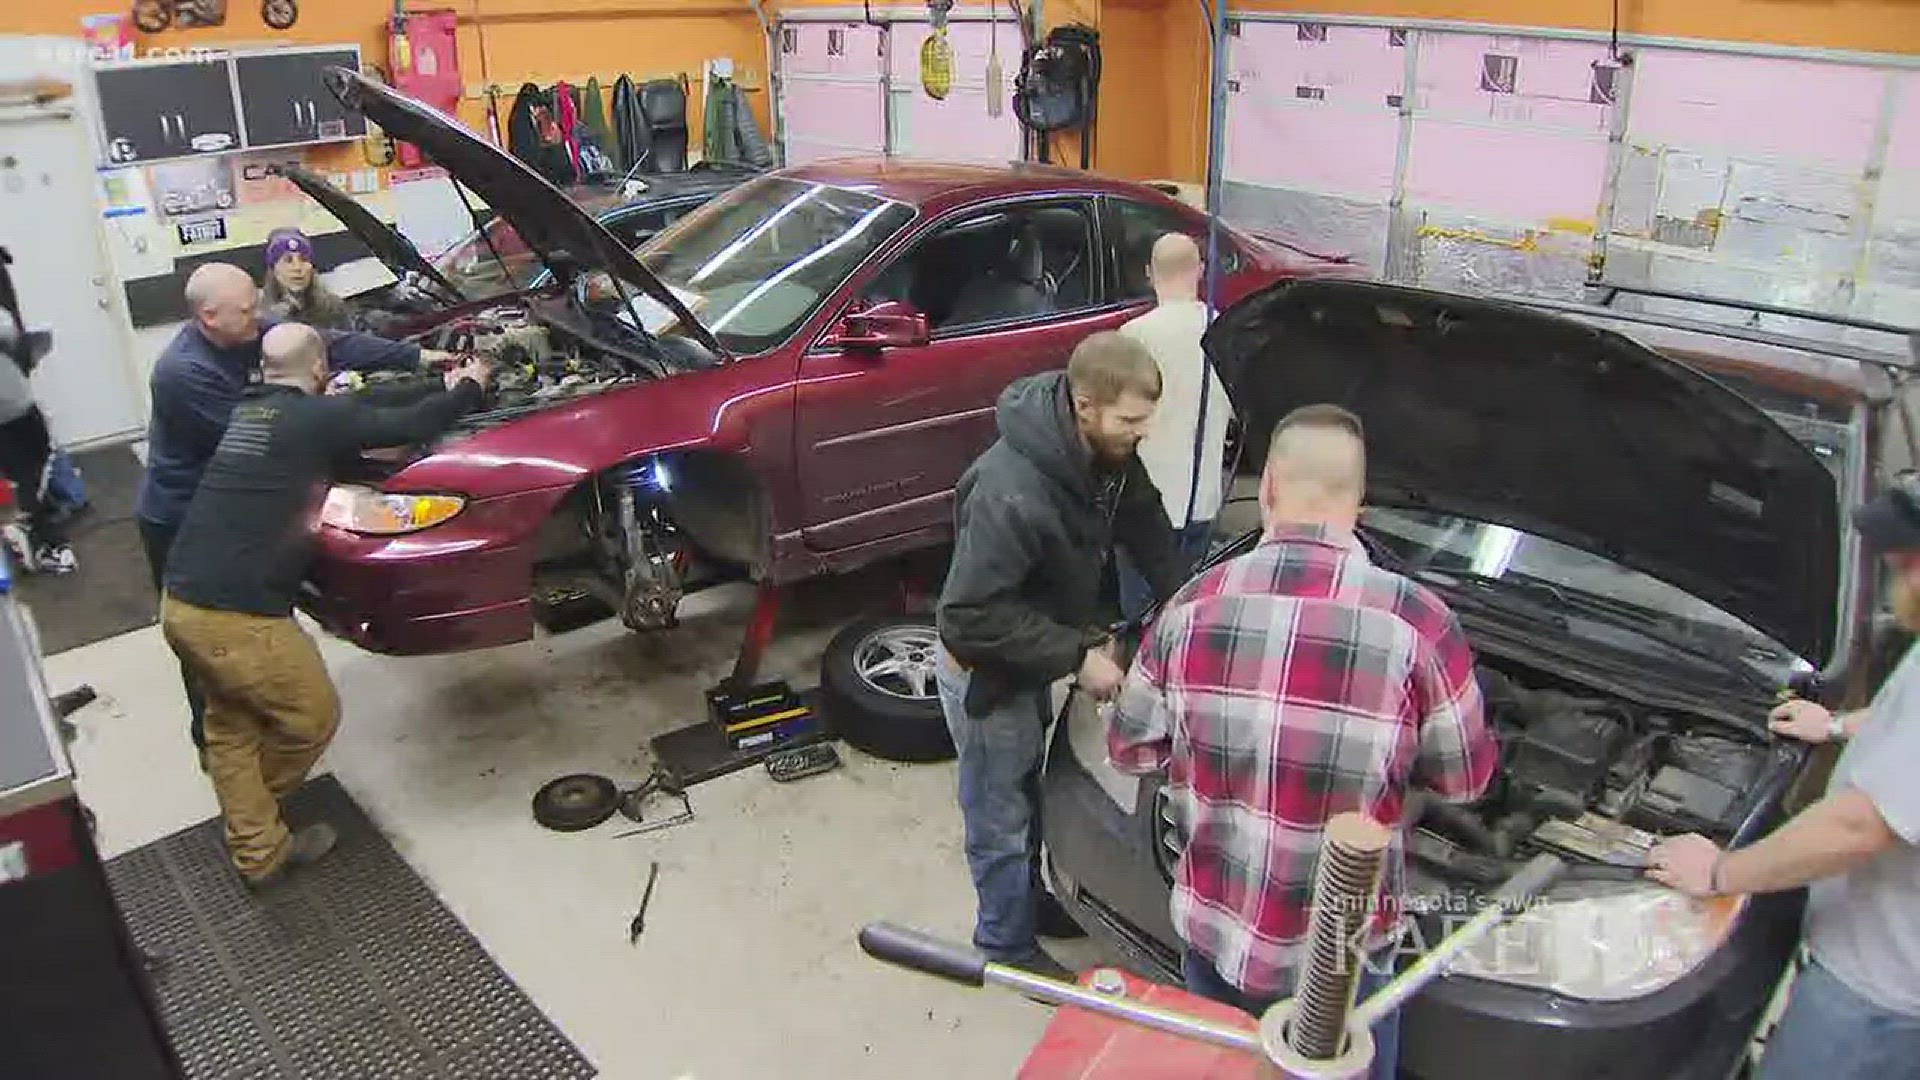 Single moms, veterans and seniors get free labor on their car repairs at the Car Clinic. But the volunteers don't just take care of their cars. http://kare11.tv/2oHKazN